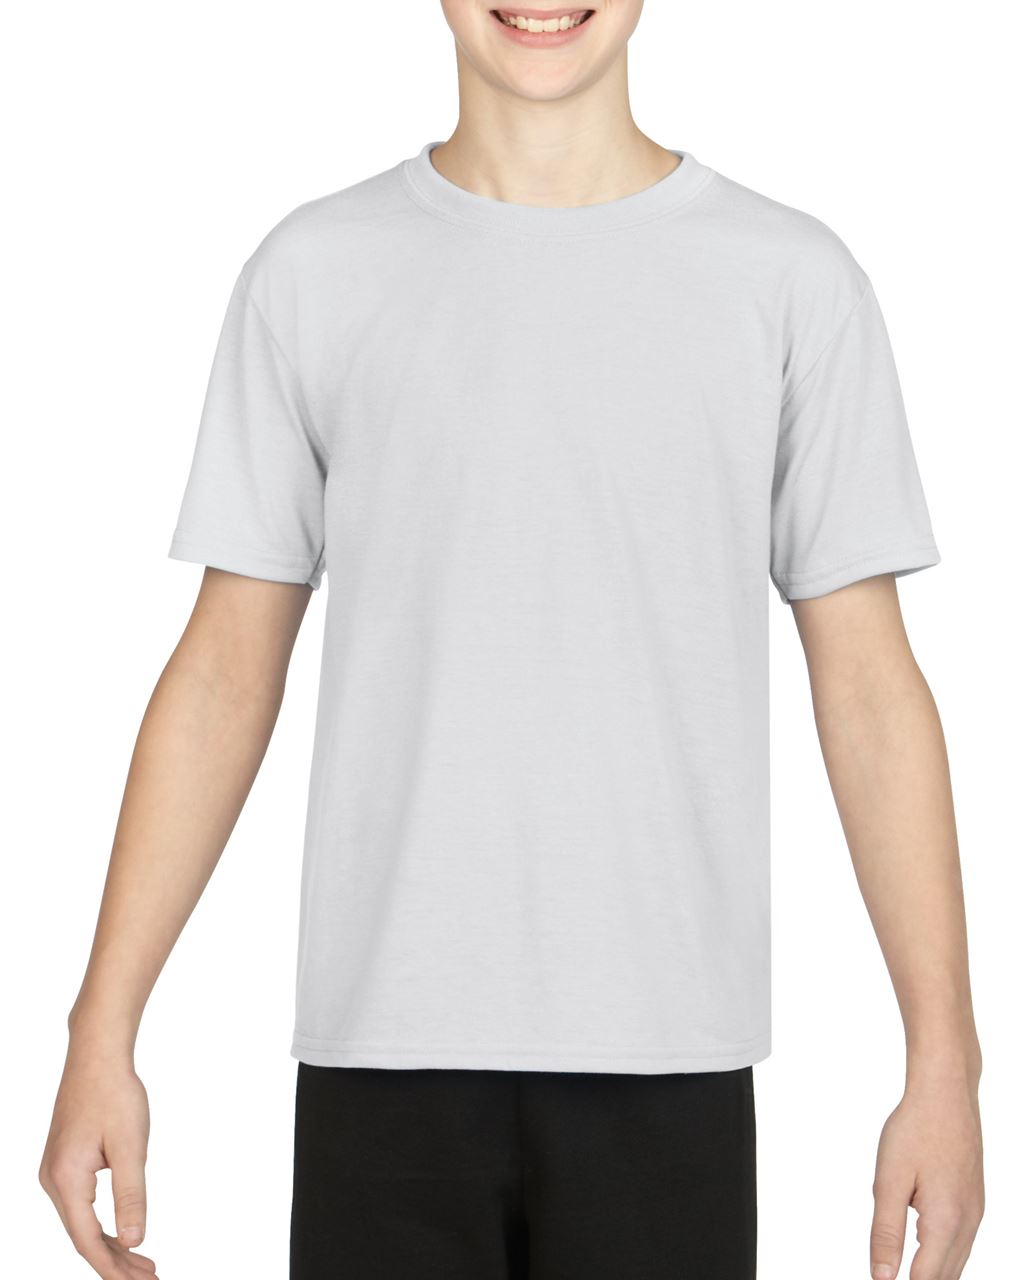 Promo  PERFORMANCE® YOUTH T-SHIRT